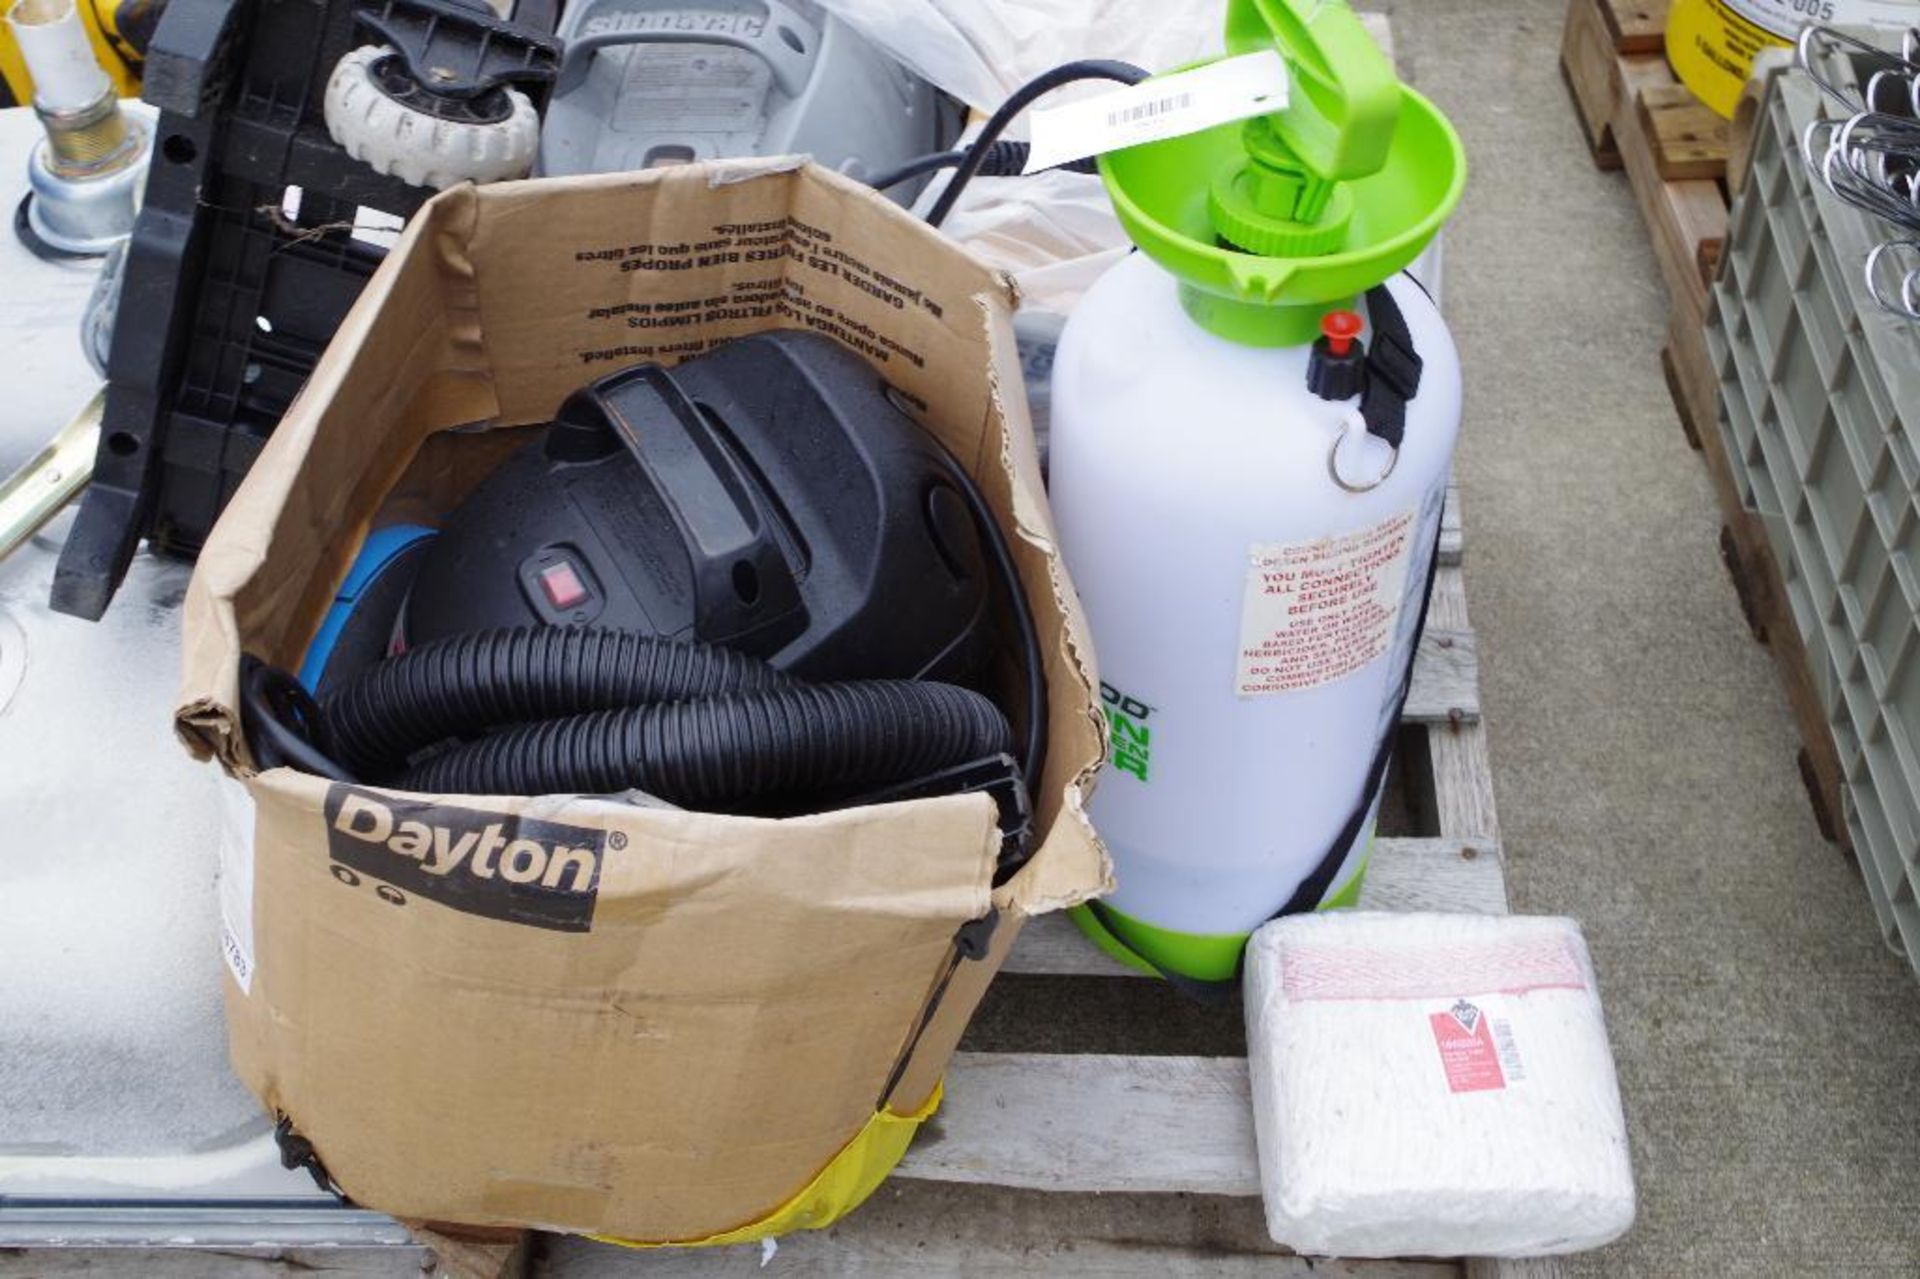 [QTY] Asst. Items, Condition Unknown: Winch Puller, Vacuums, Fuel Can & More